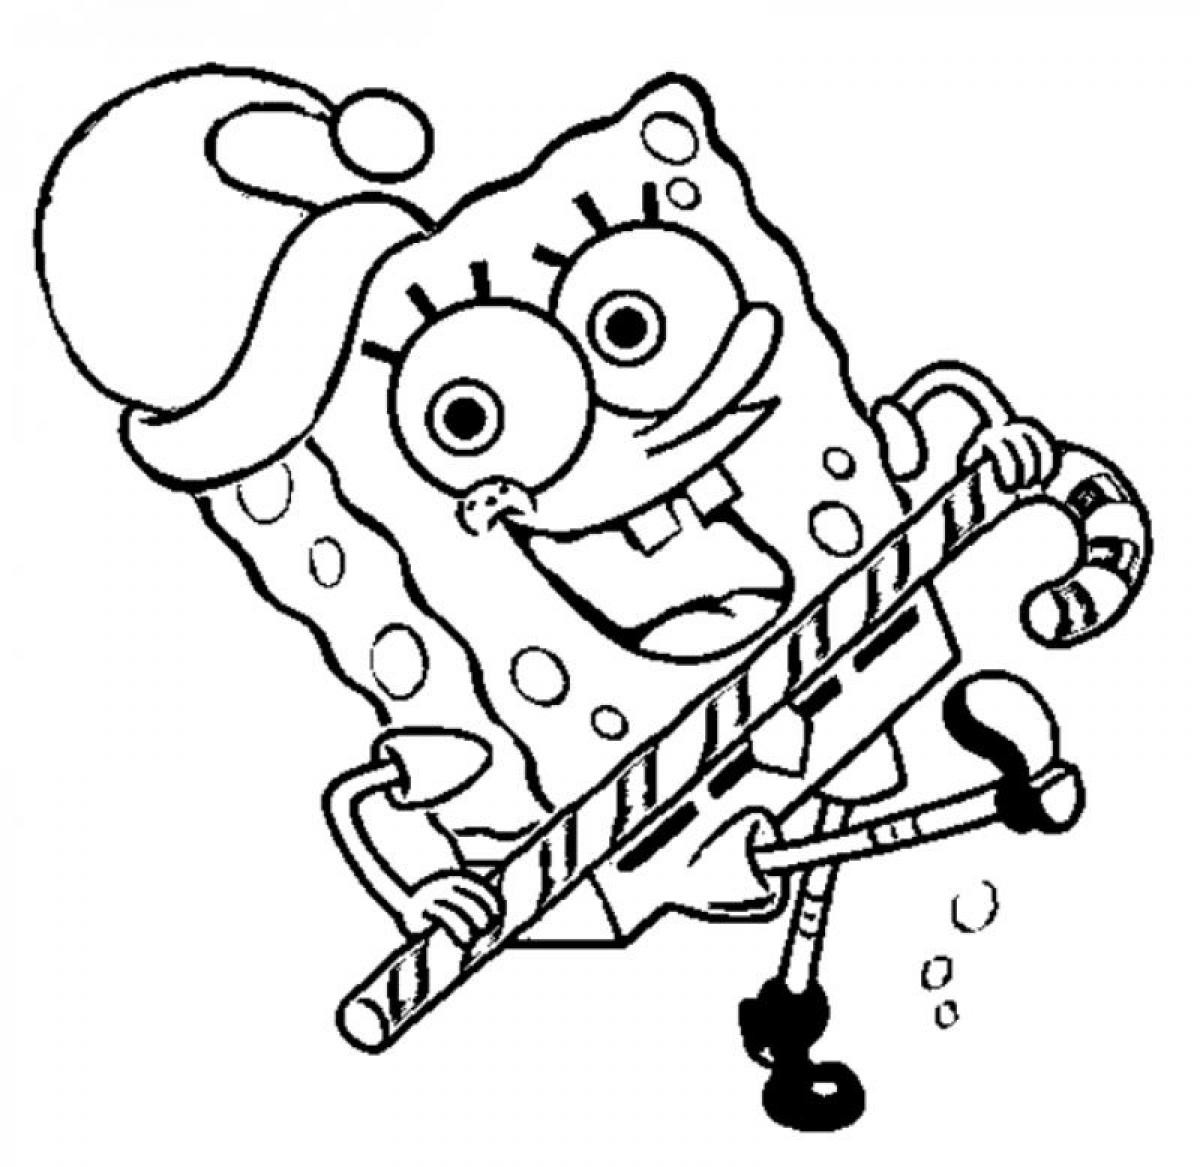 Spongebob and Patrick Christmas Coloring Pages